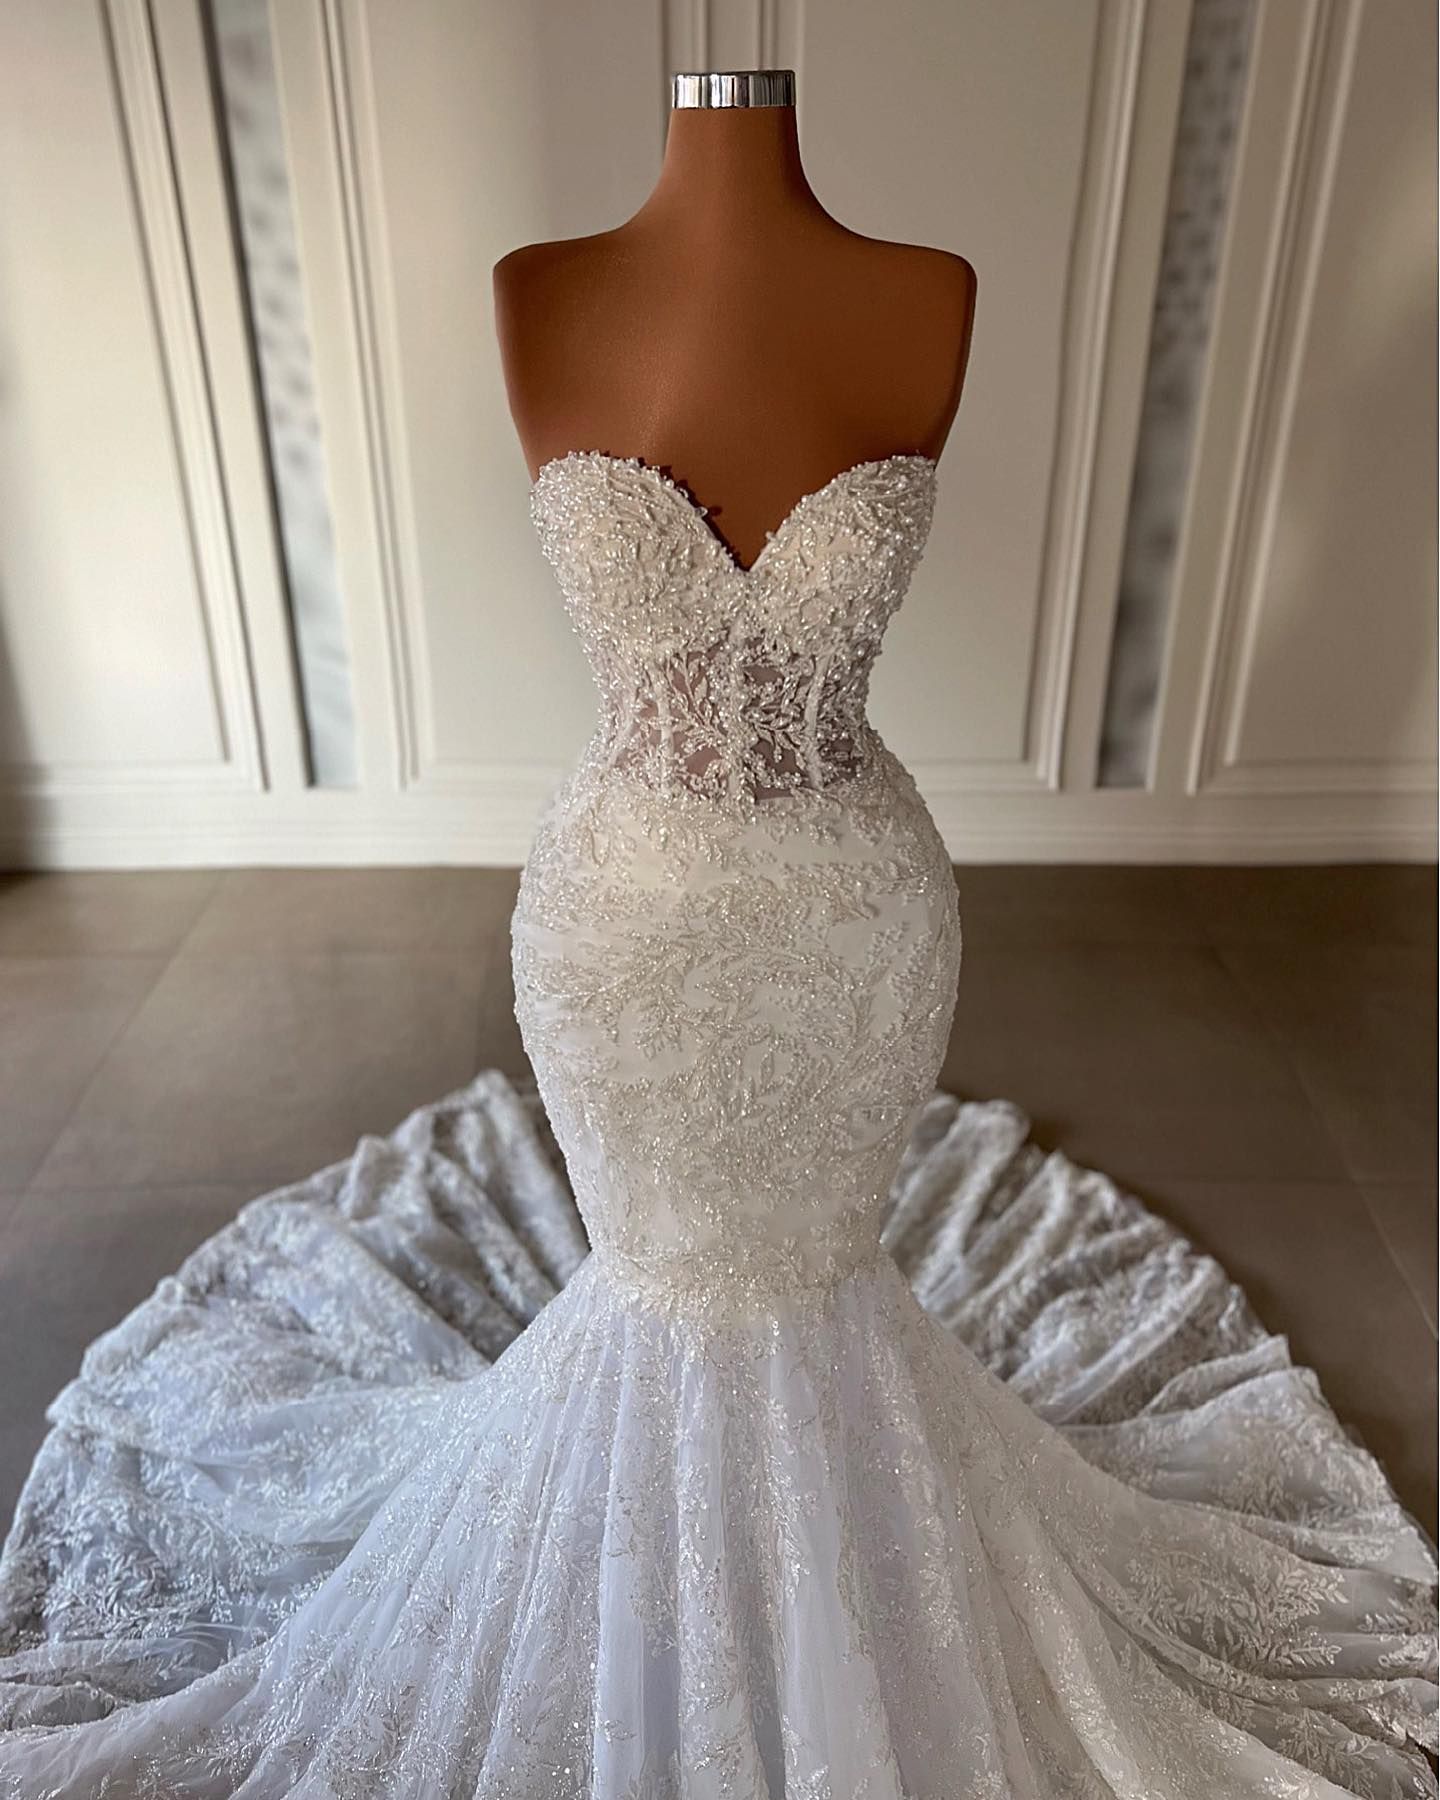 2024 Luxury Mermaid Wedding Dresses Bridal Gowns Sweetheart Illusion Full Lace Appliques Crystal Beads Plus Size African Nigerian Fishtail